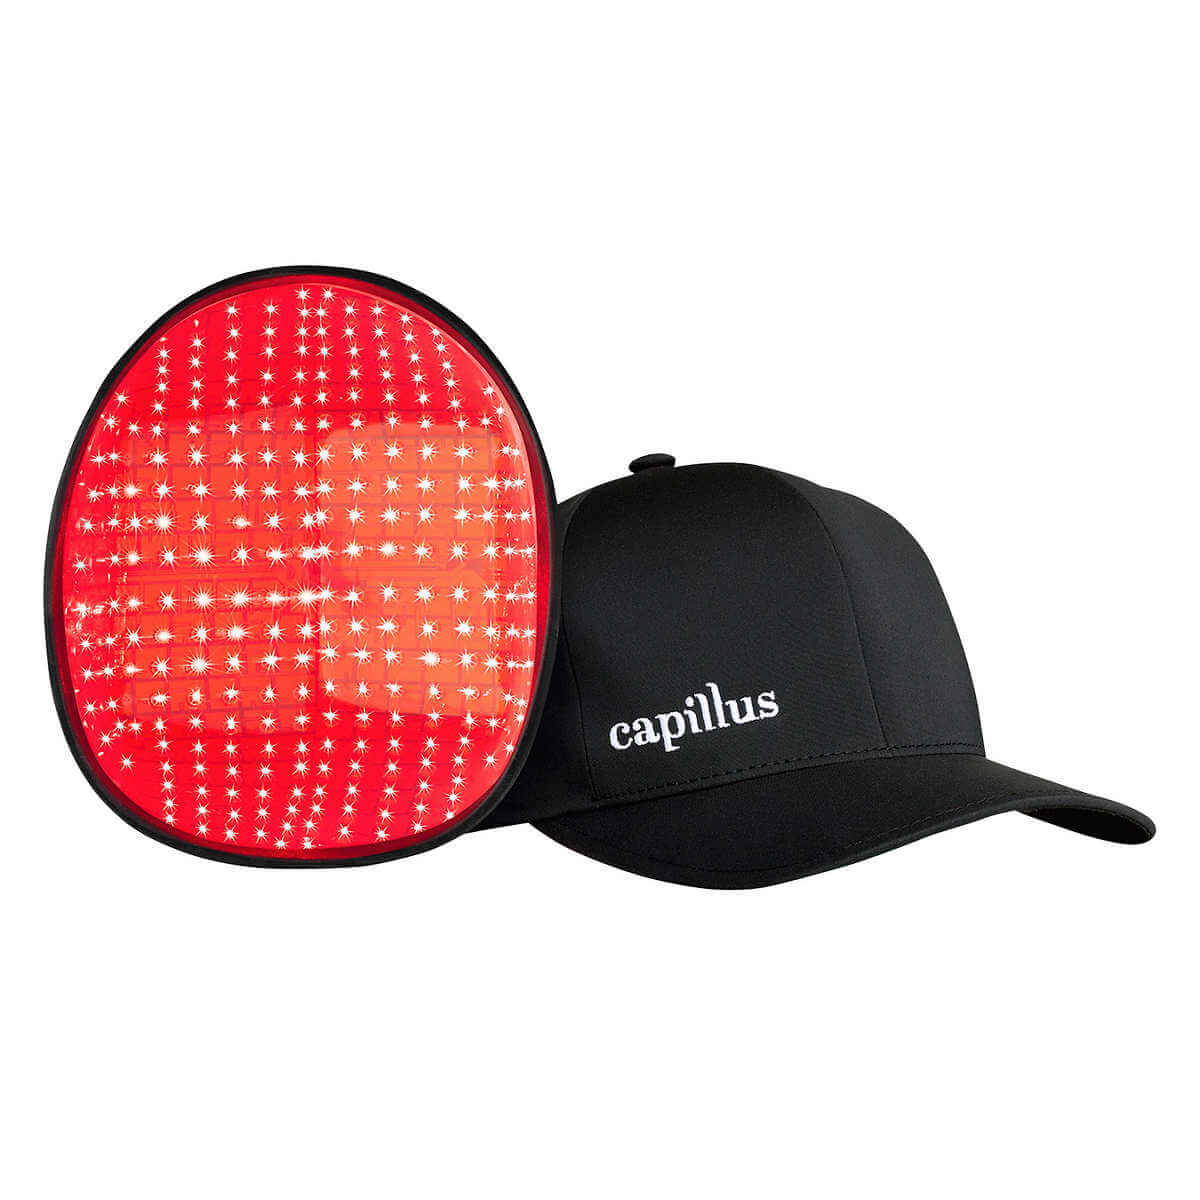 Capillus Pro Cap with 272 Laser Diodes for Hair Regrowth Therapy